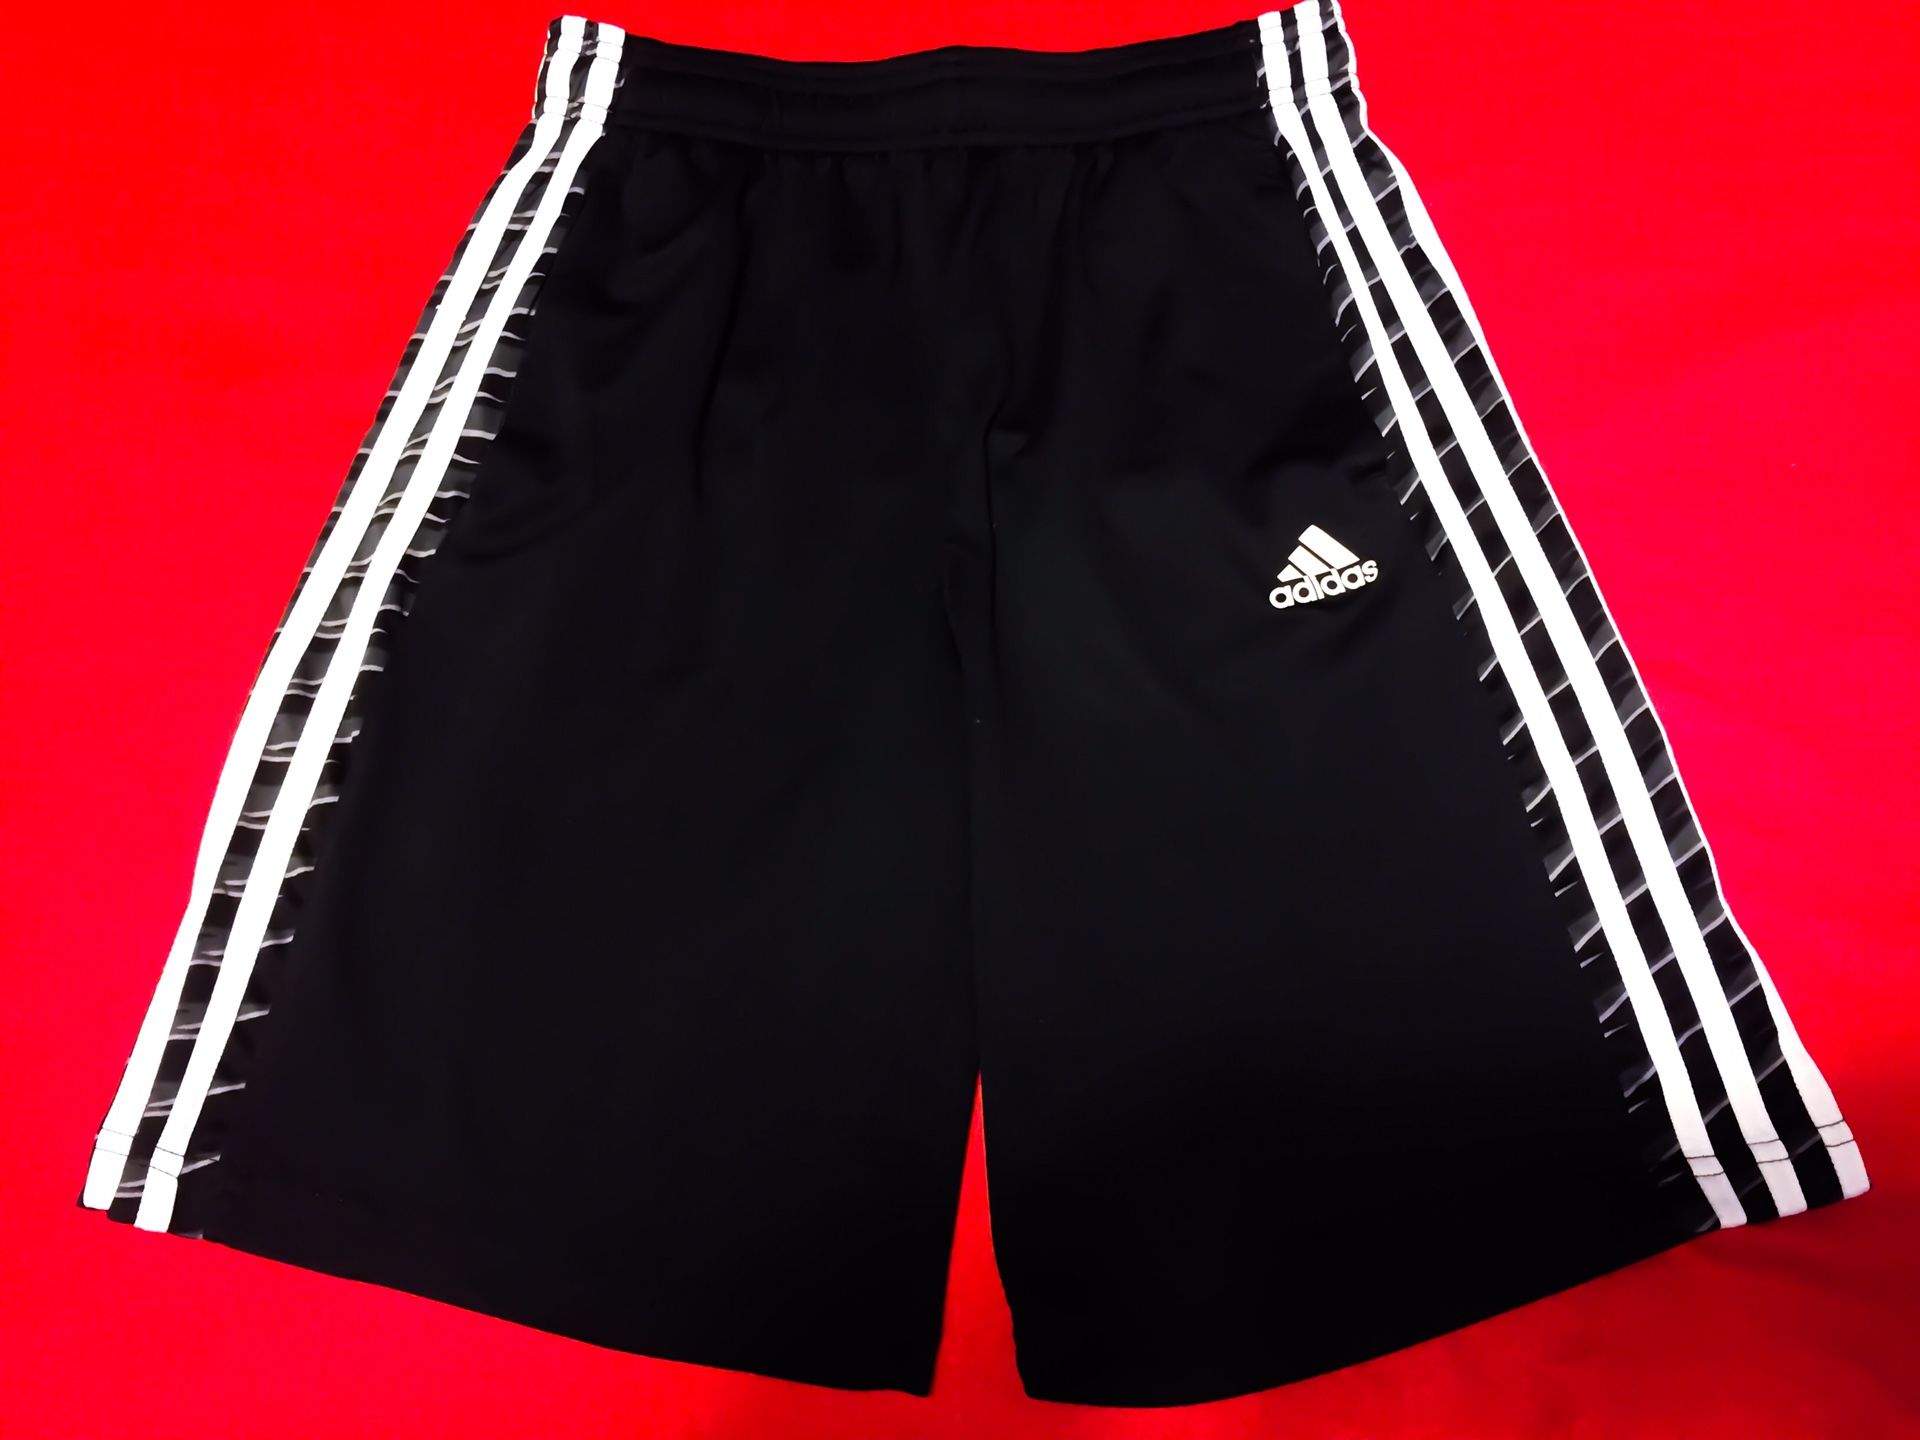 New! Adidas Shorts, Youth Large or Men’s Small